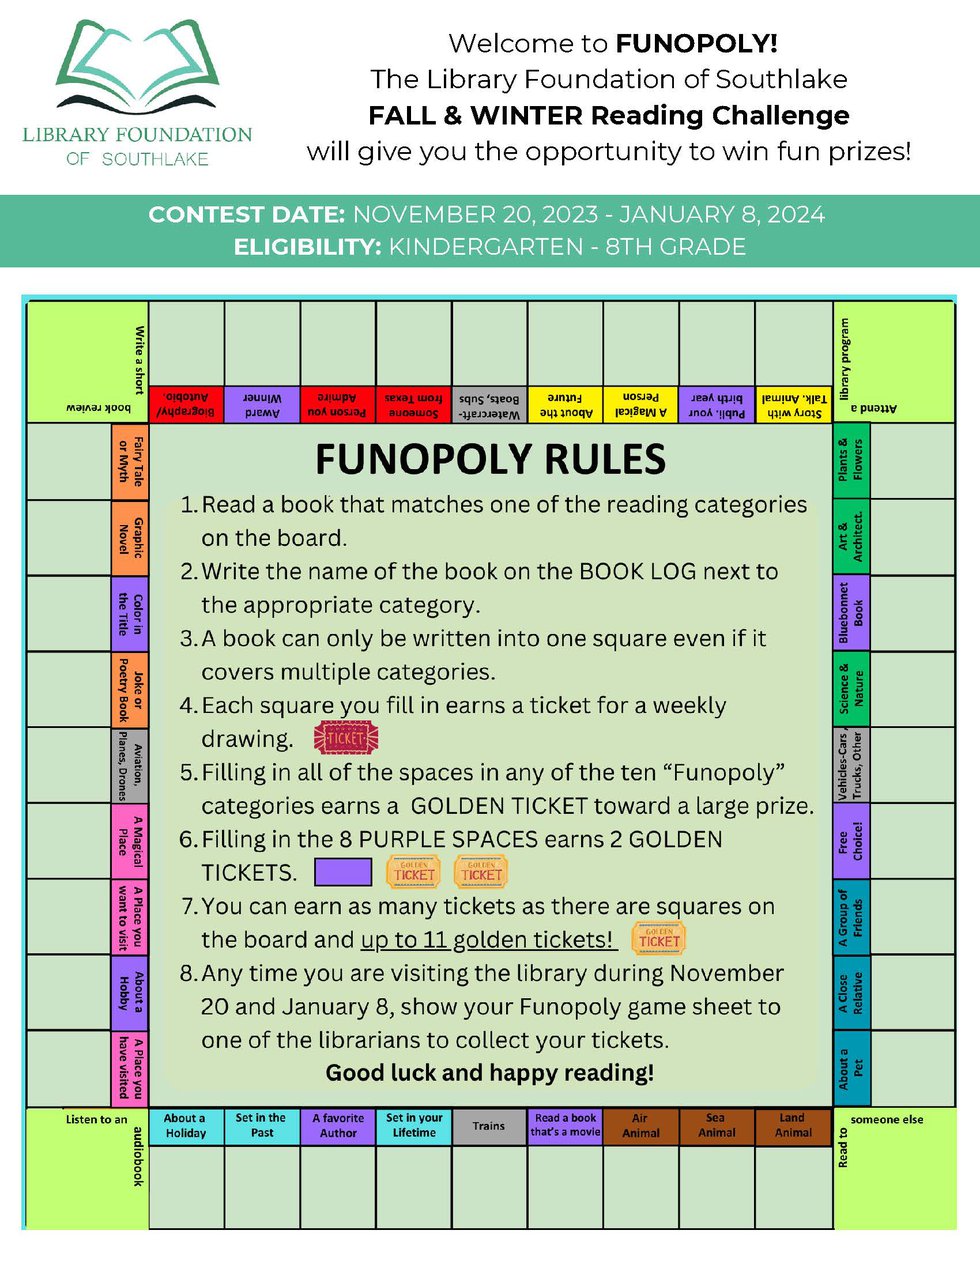 Funopoly_Page_1 (1).jpg